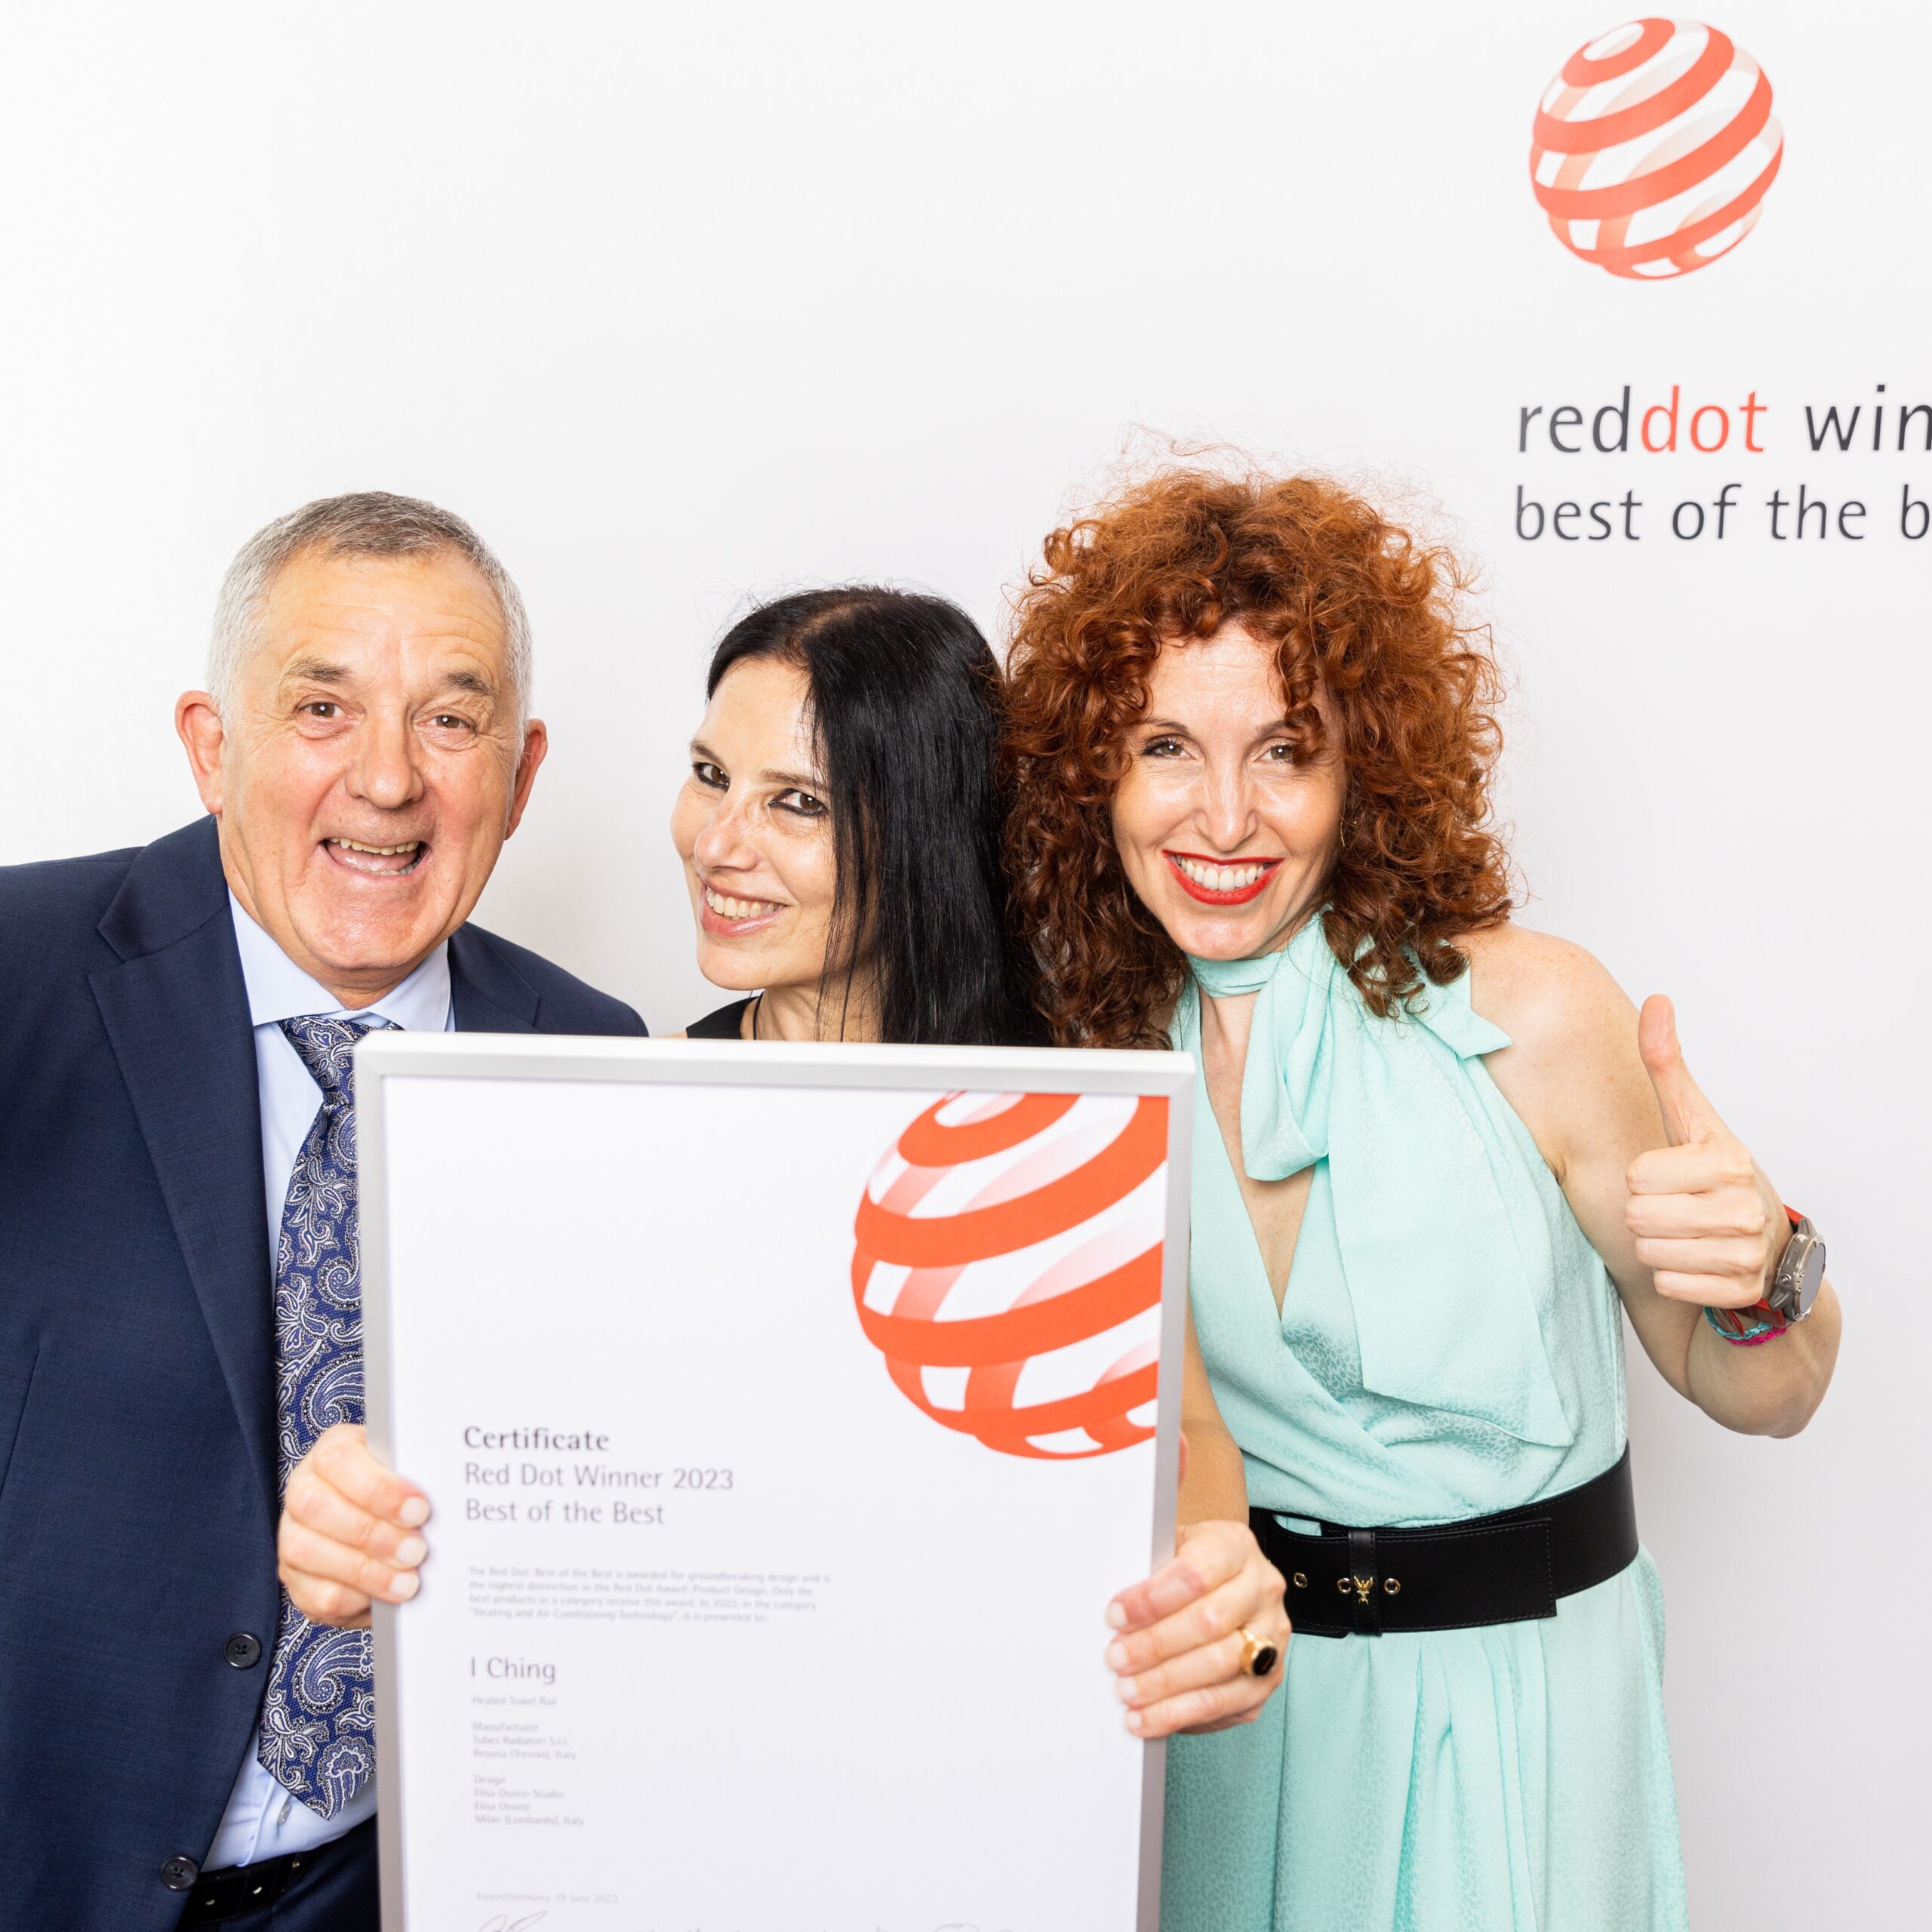 I Ching awarded at the Red Dot Gala 2023 with the Best of the Best